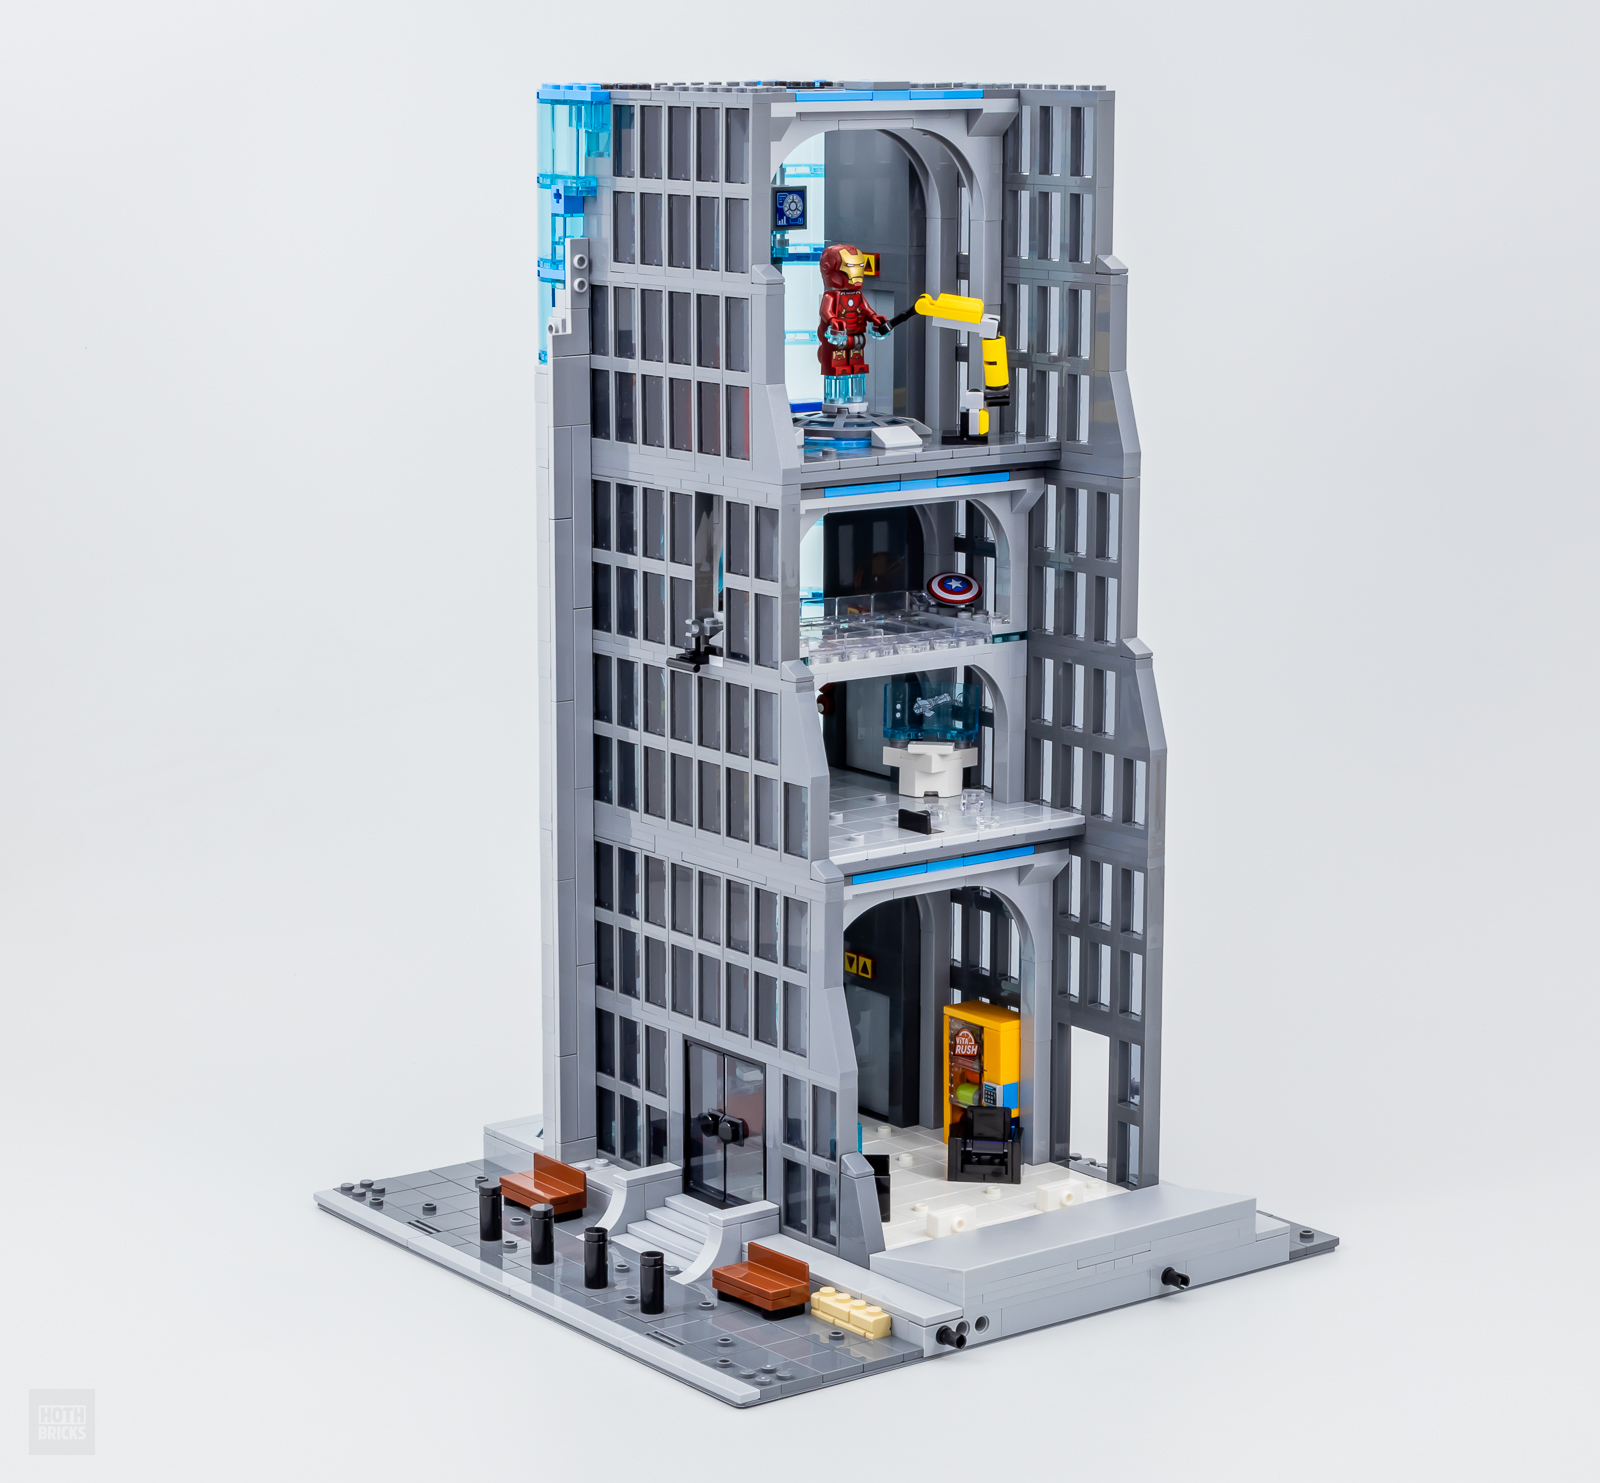 LEGO Marvel Avengers Tower (76269) Officially Announced - The Brick Fan